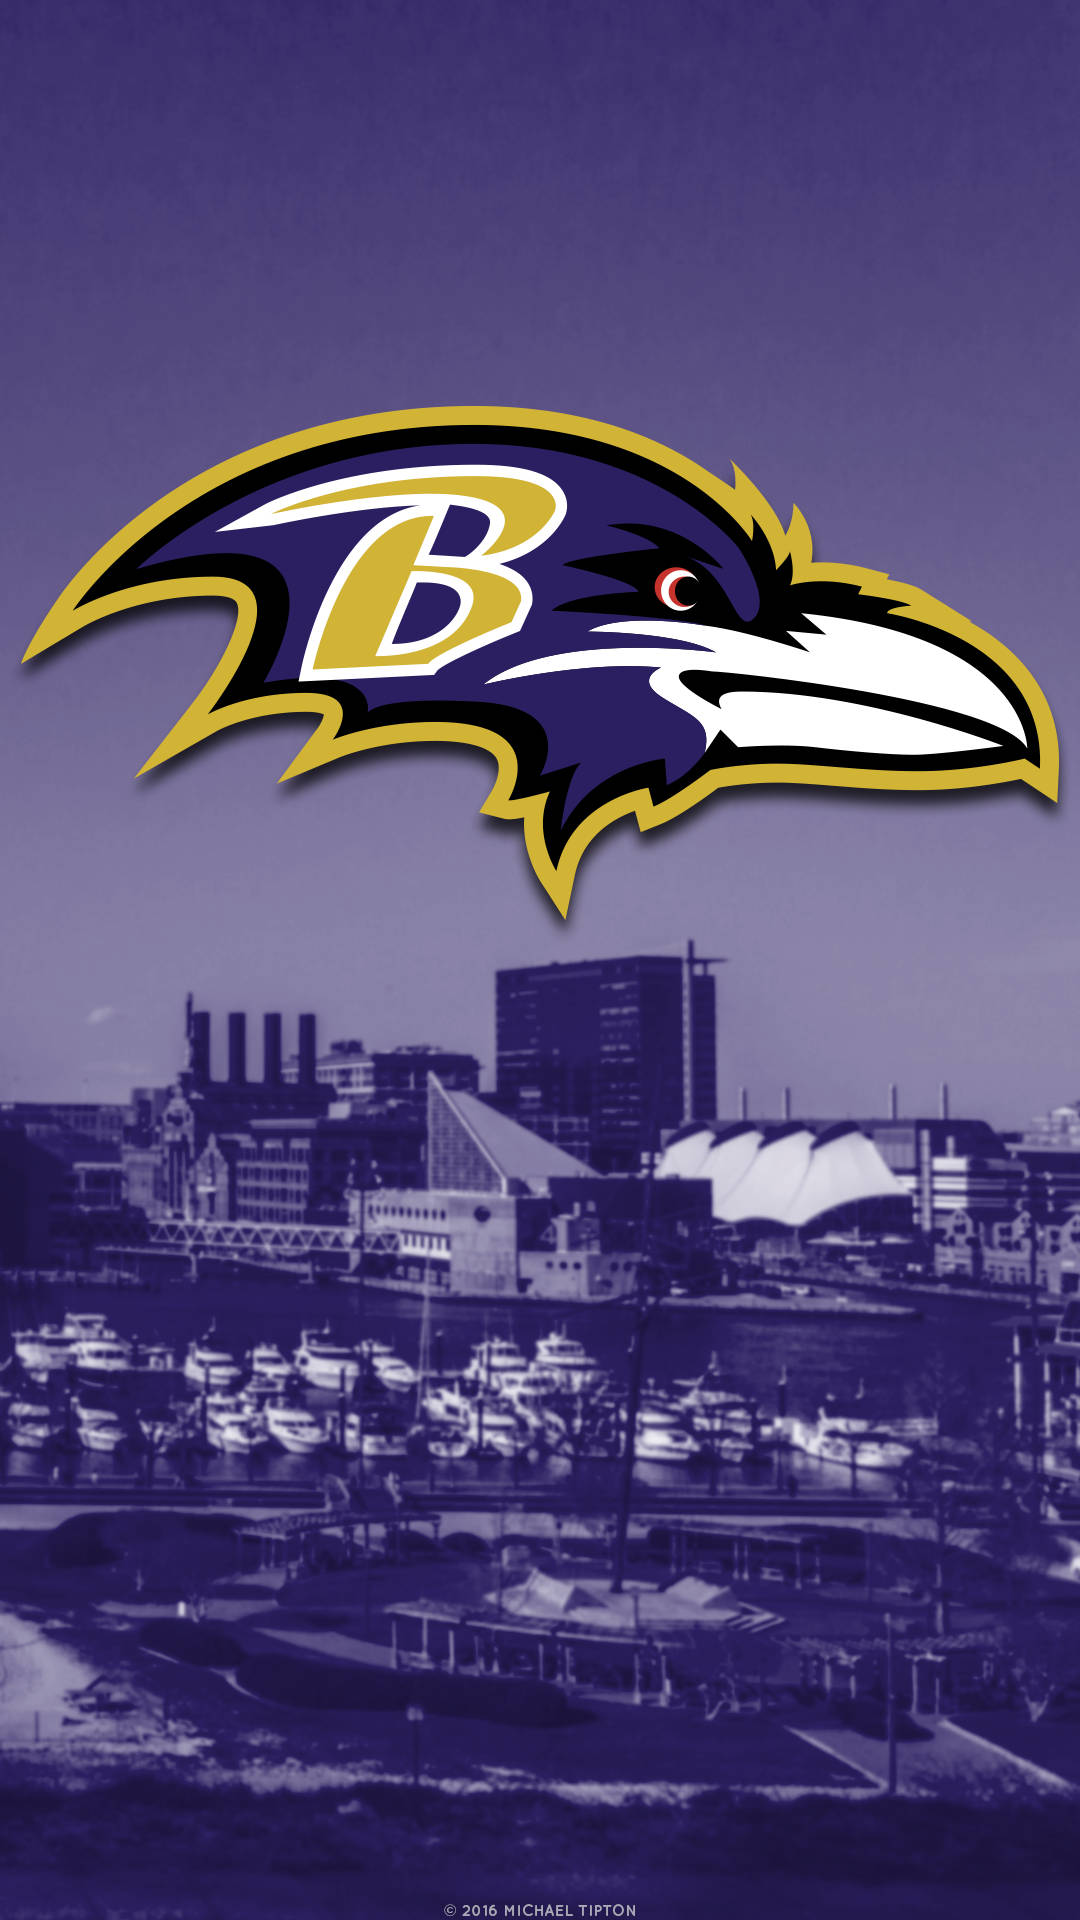 Unlock the power of football with the new Baltimore Ravens iPhone Wallpaper